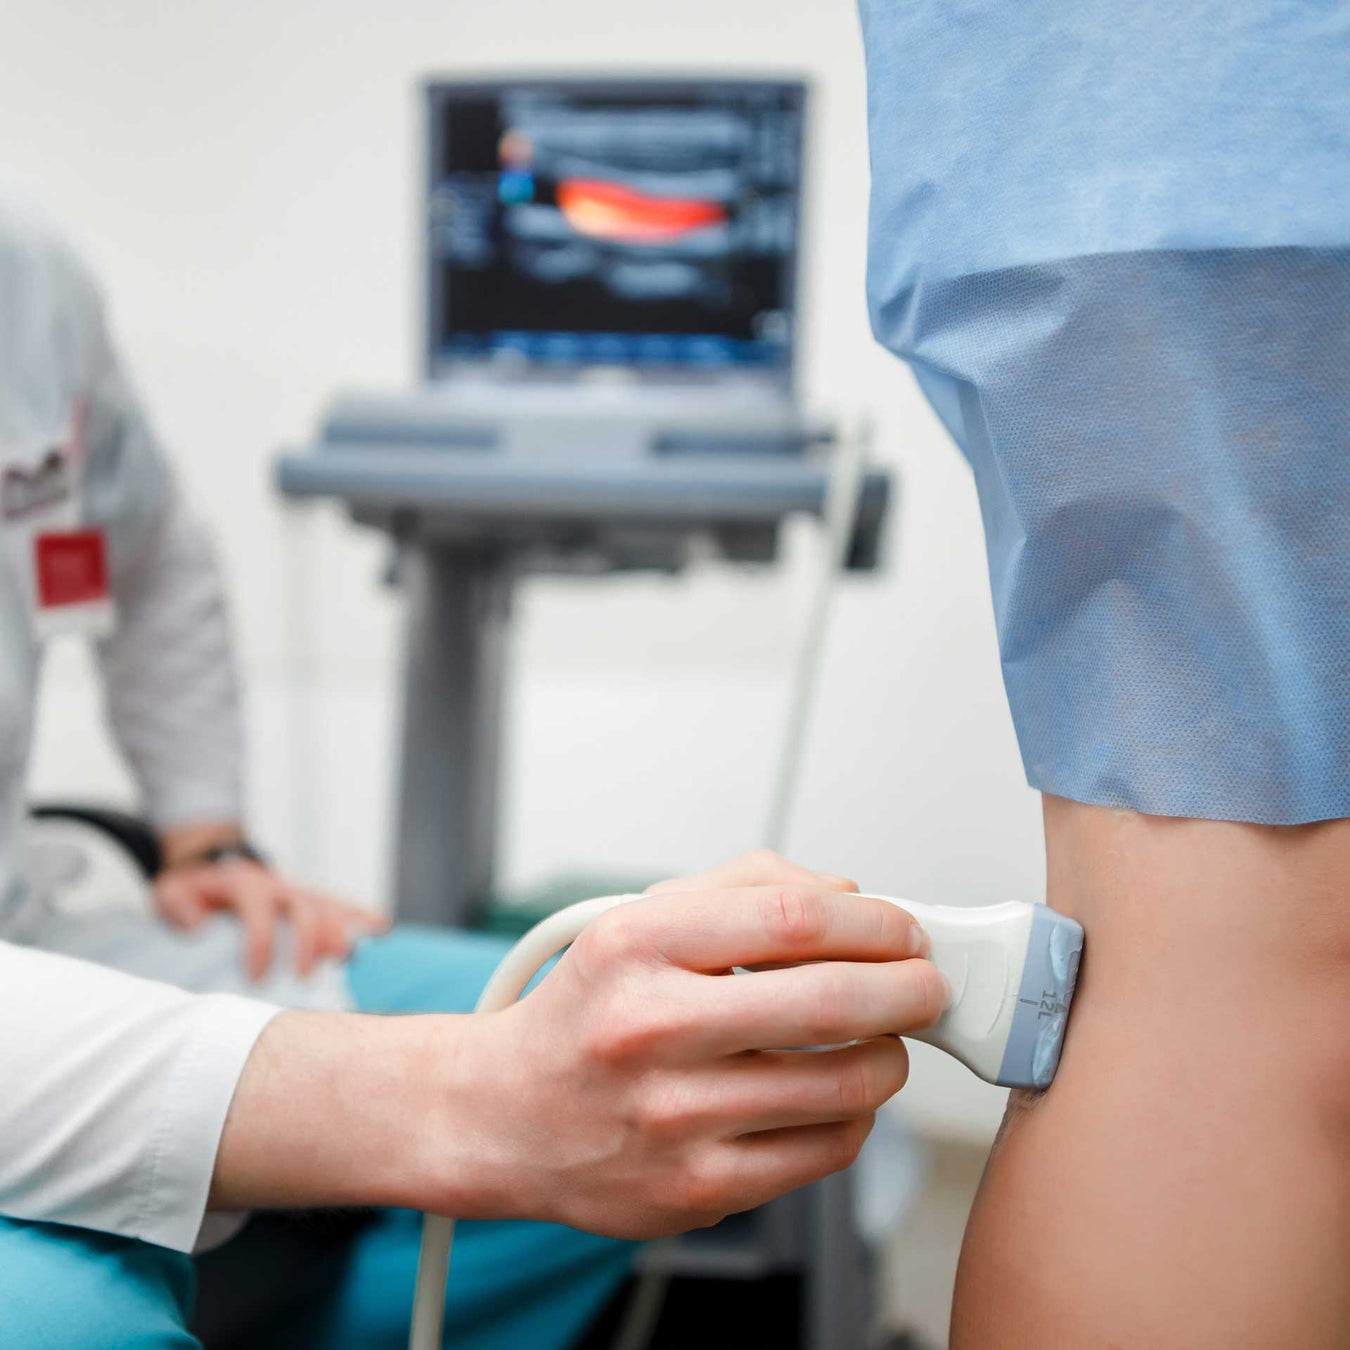 physical therapist using ultrasound therapy to treat patient's leg pain